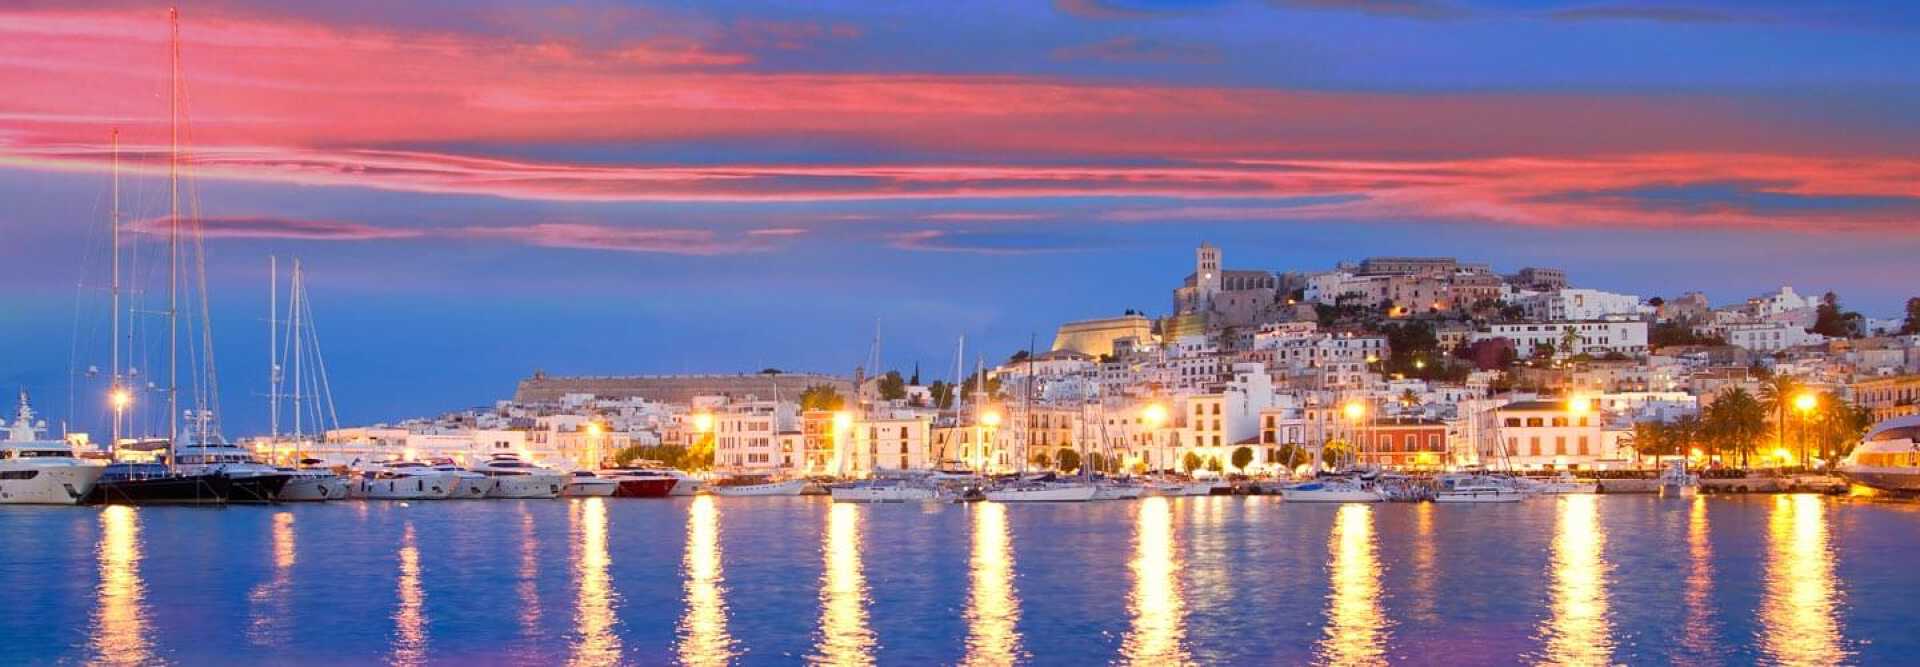 Pink sunset view from boats and yachts in the harbor with the church of Ibiza town